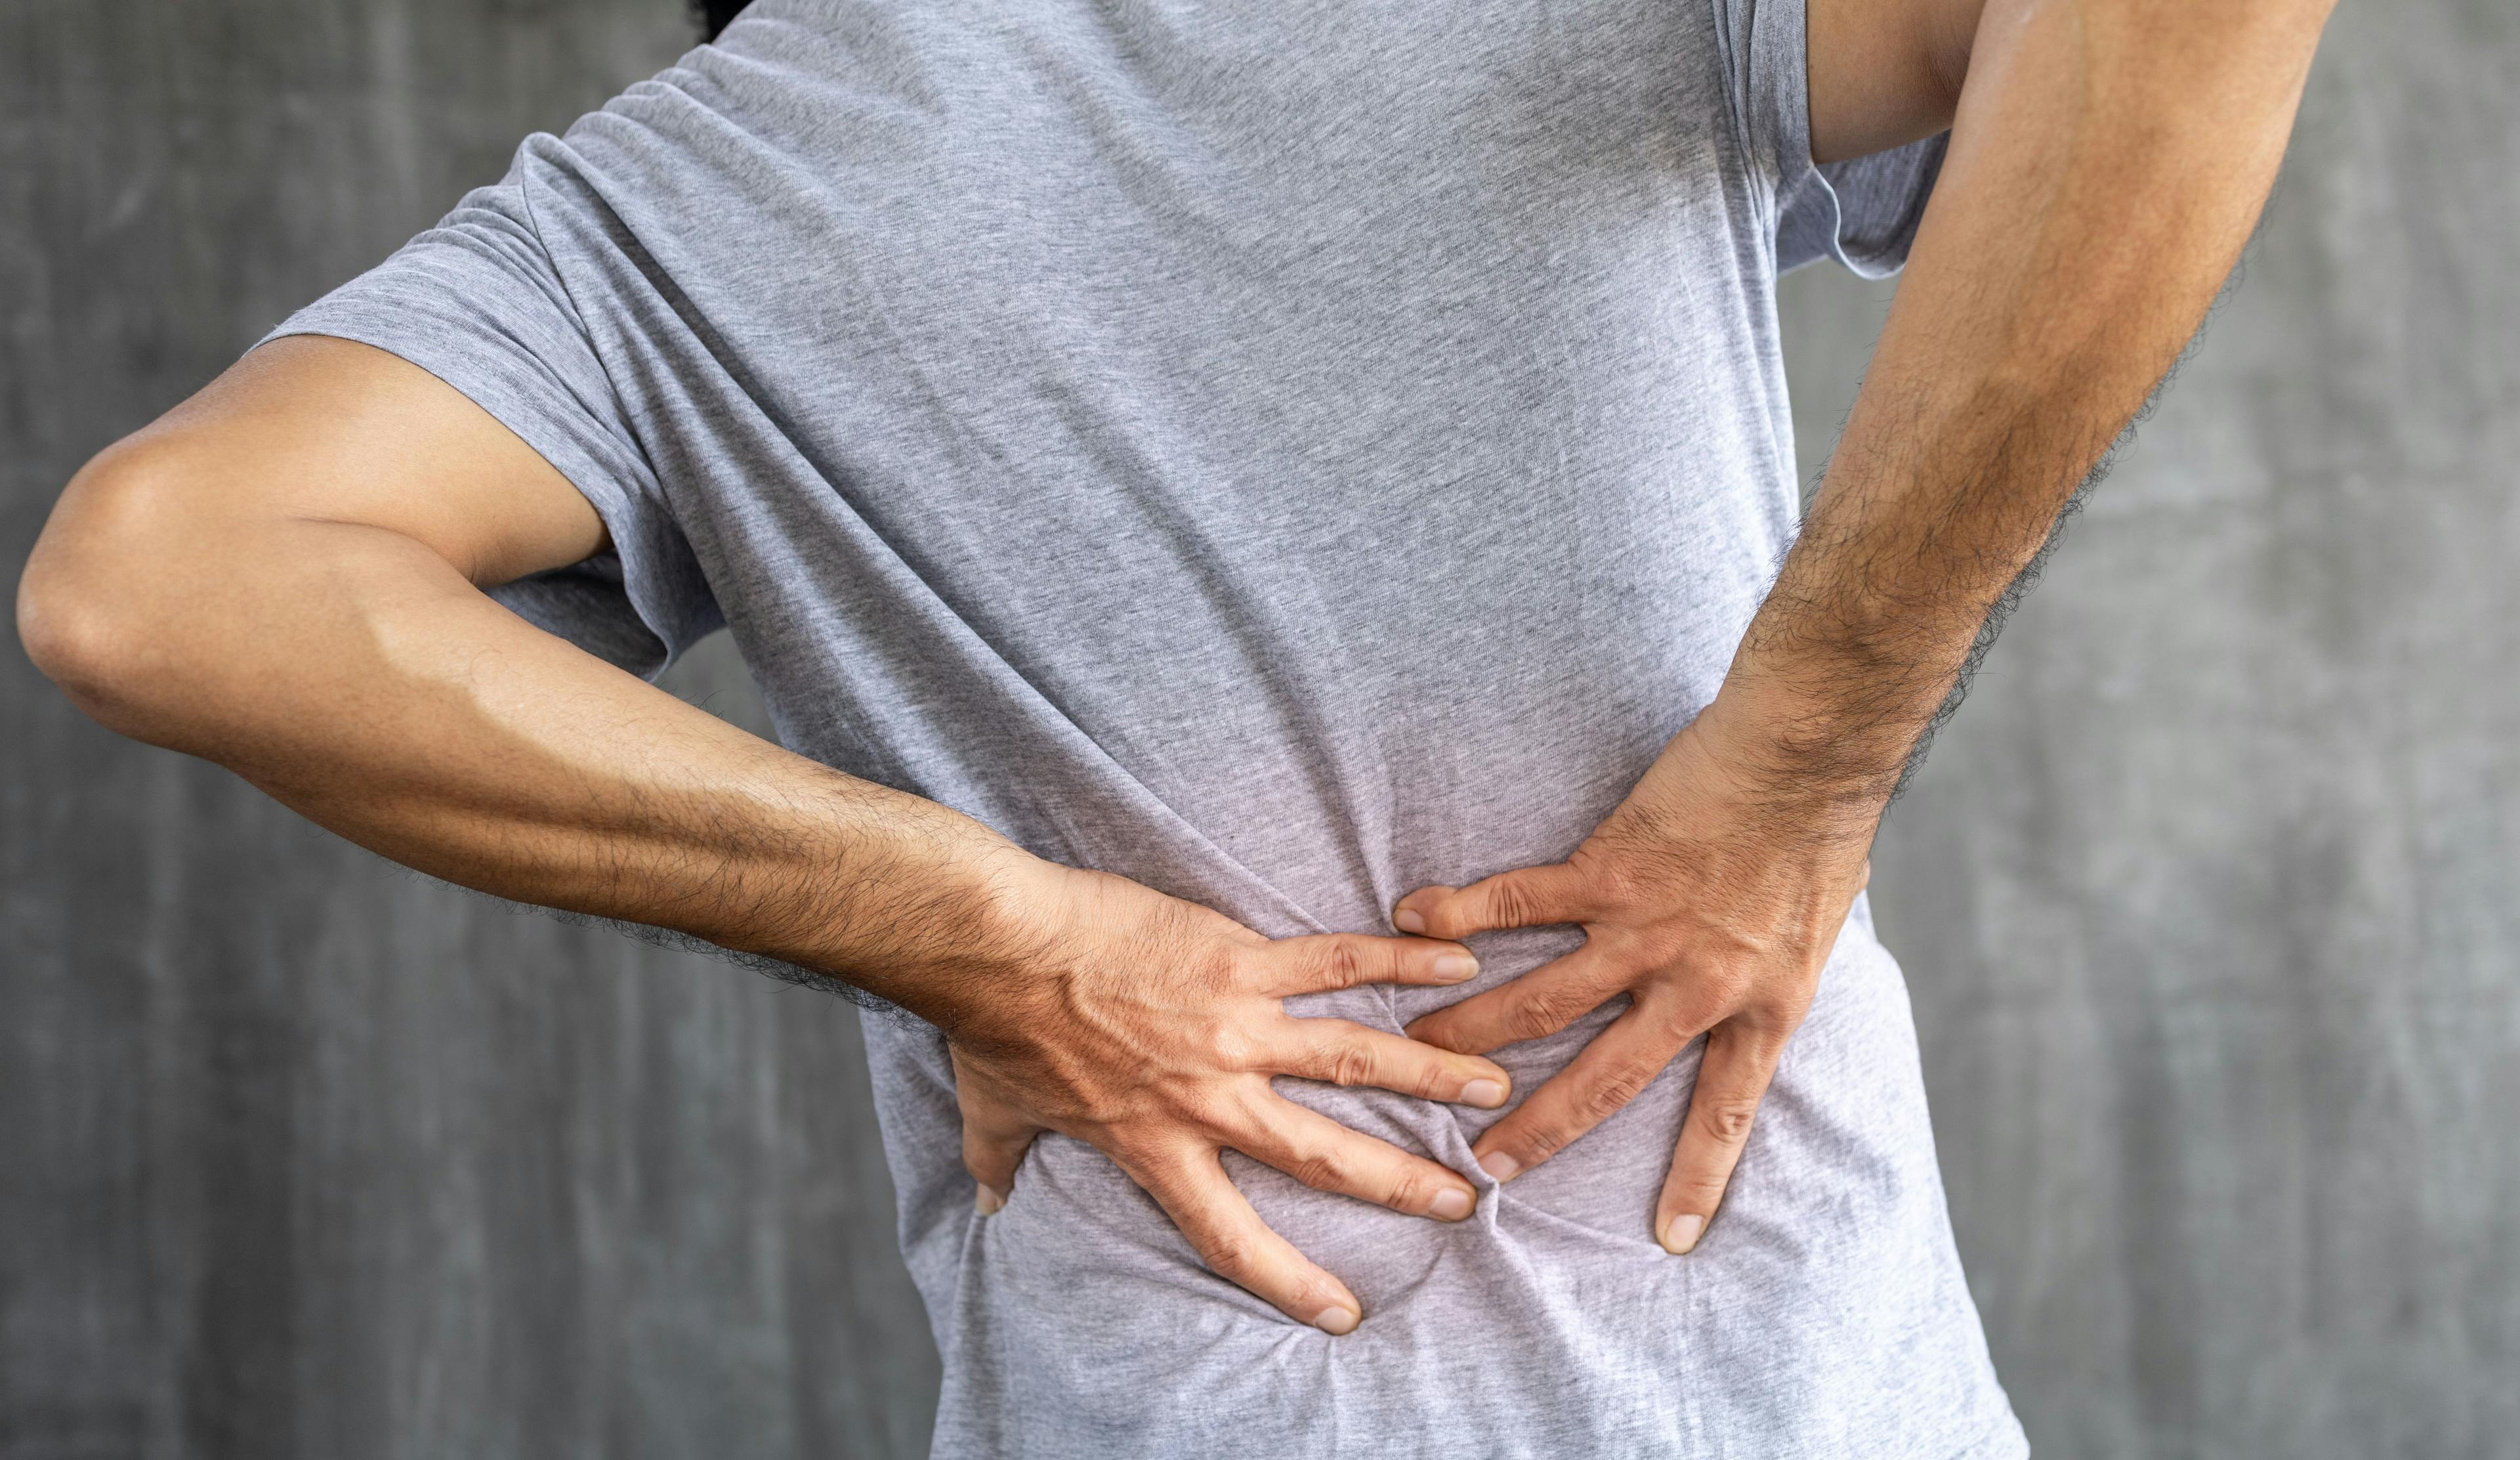 Study Casts Doubt on Cost-Effectiveness of Digital Therapy for Lower Back Pain